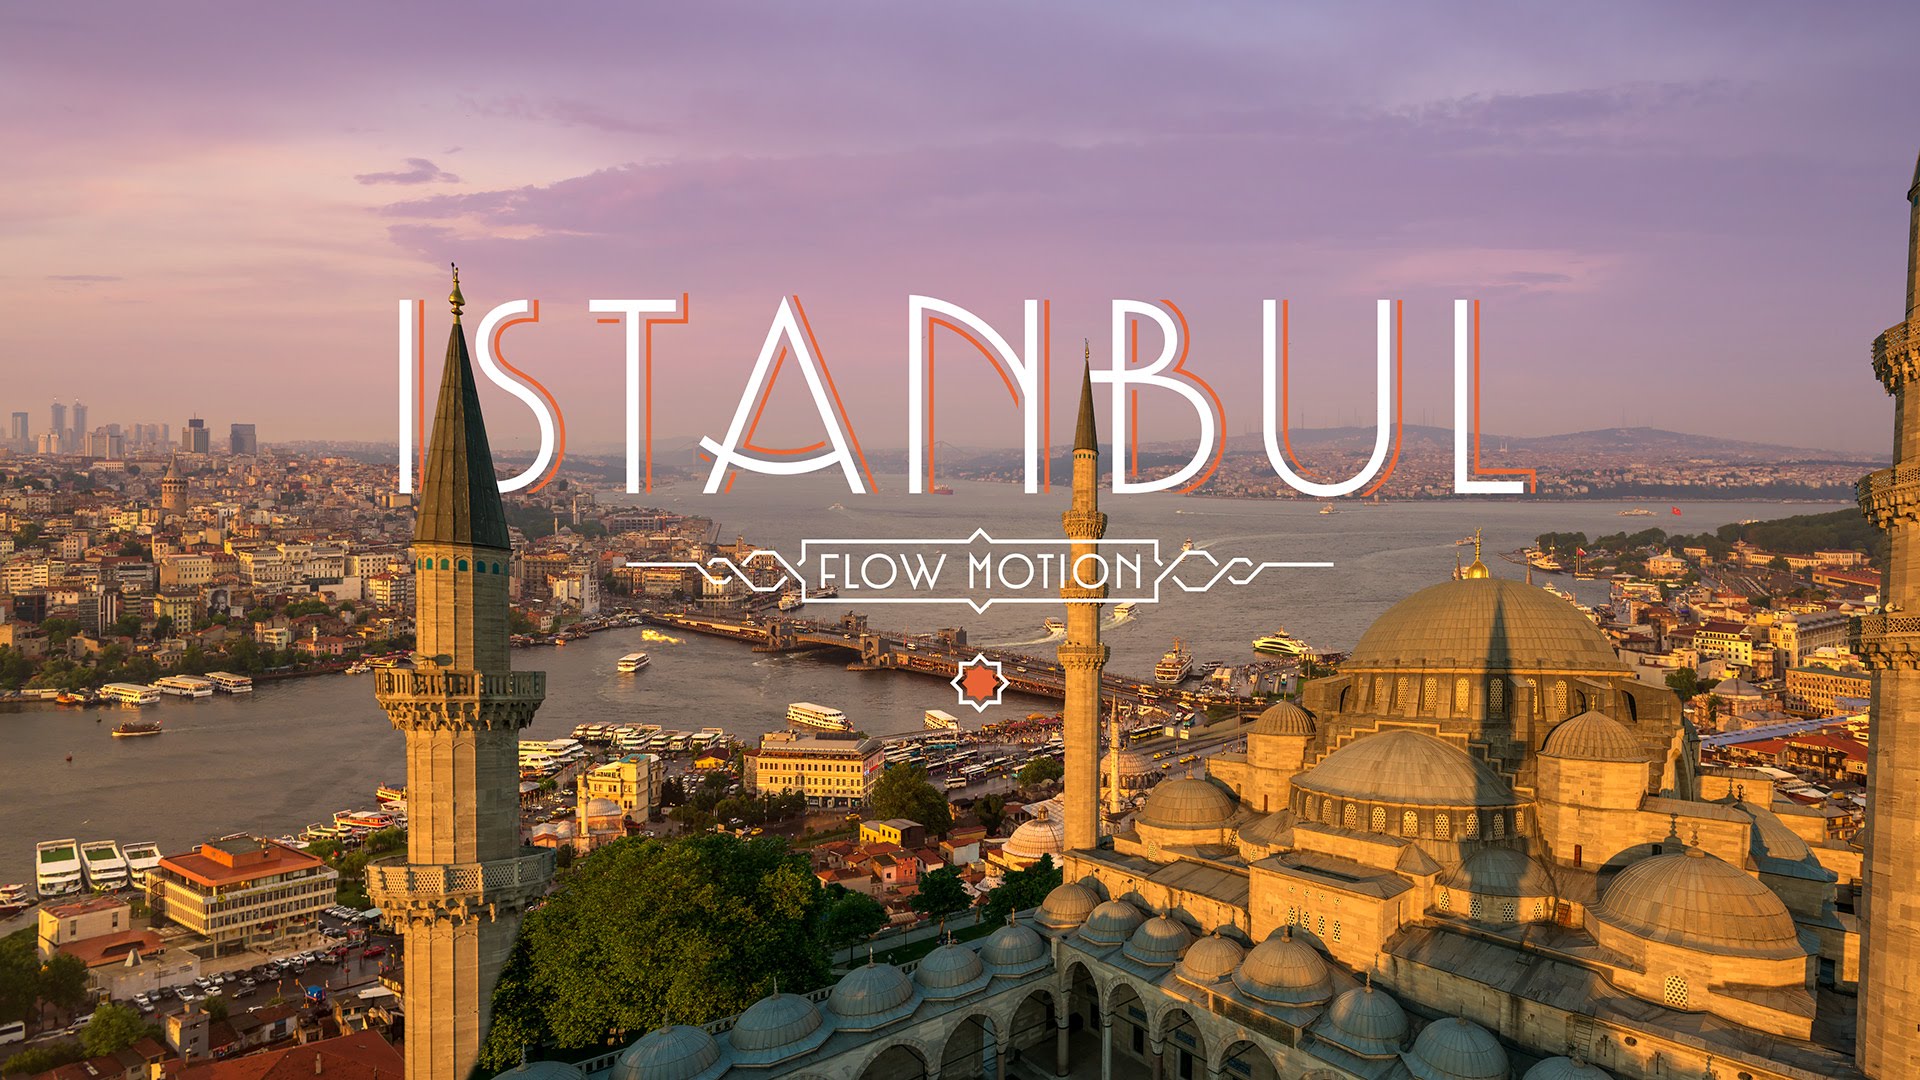 Turkish Airlines: Istanbul | Flow Through the City of Tales - YouTube